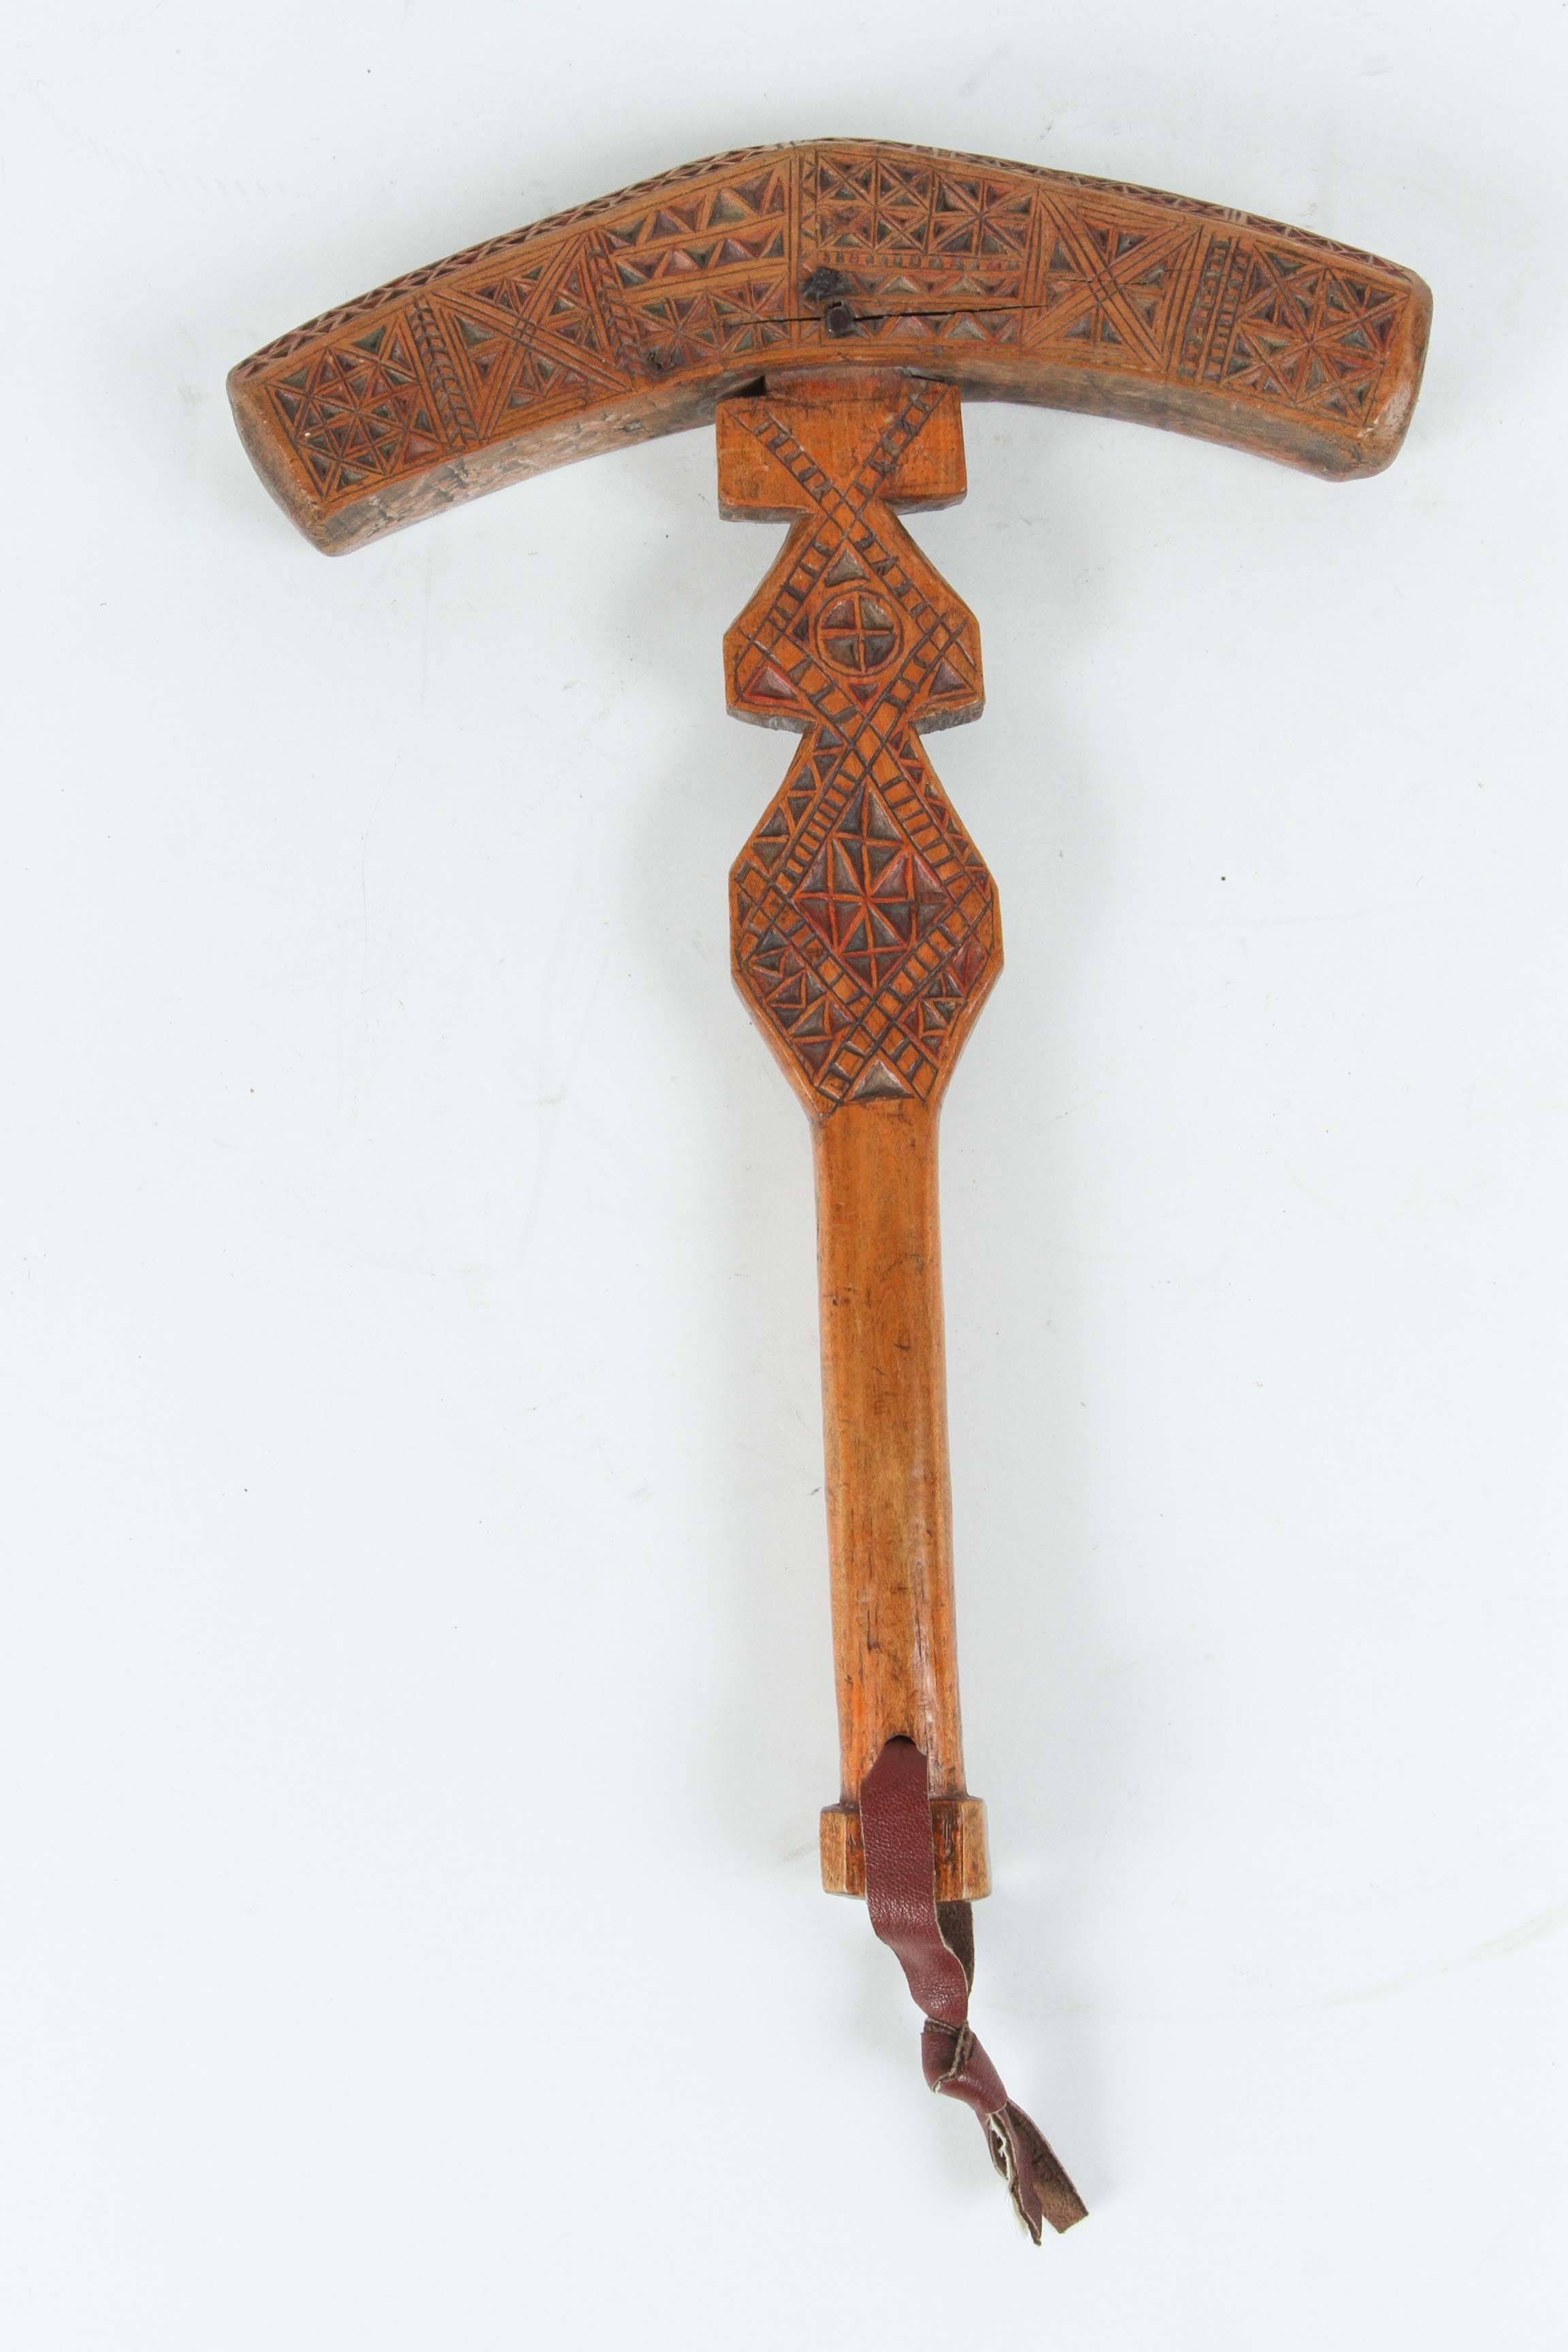 Moroccan tribal Berber wooden sugar hammer.
Handcrafted by the Berber women of Morocco, hand-carved wood with tribal design, this folk art instrument is a sugar hammer. Sugar in Morocco was sold in block cones, and you needed a hammer to get it in